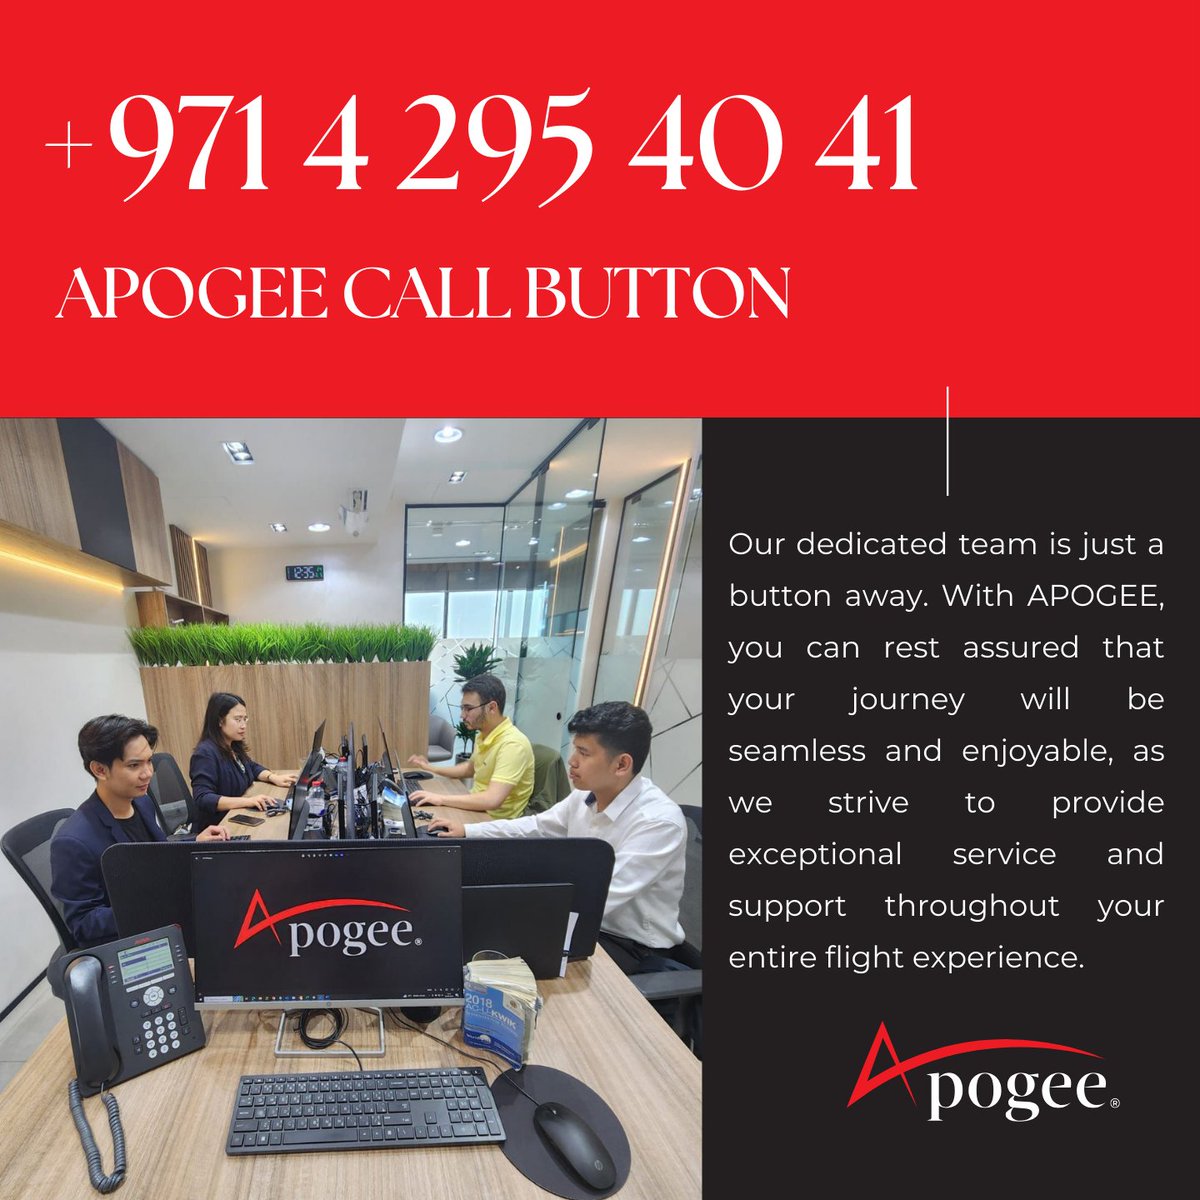 Never Hesitate to Reach Out!

APOGEE is Always Available to Cater to Your Every Flight Requirement.

#apogee #tripsupport #aviation #charter #groundhandling #cargoflight #ambulanceflight #militaryflight #techstop #travel #experience #safety #team #quality #serviceexcellence